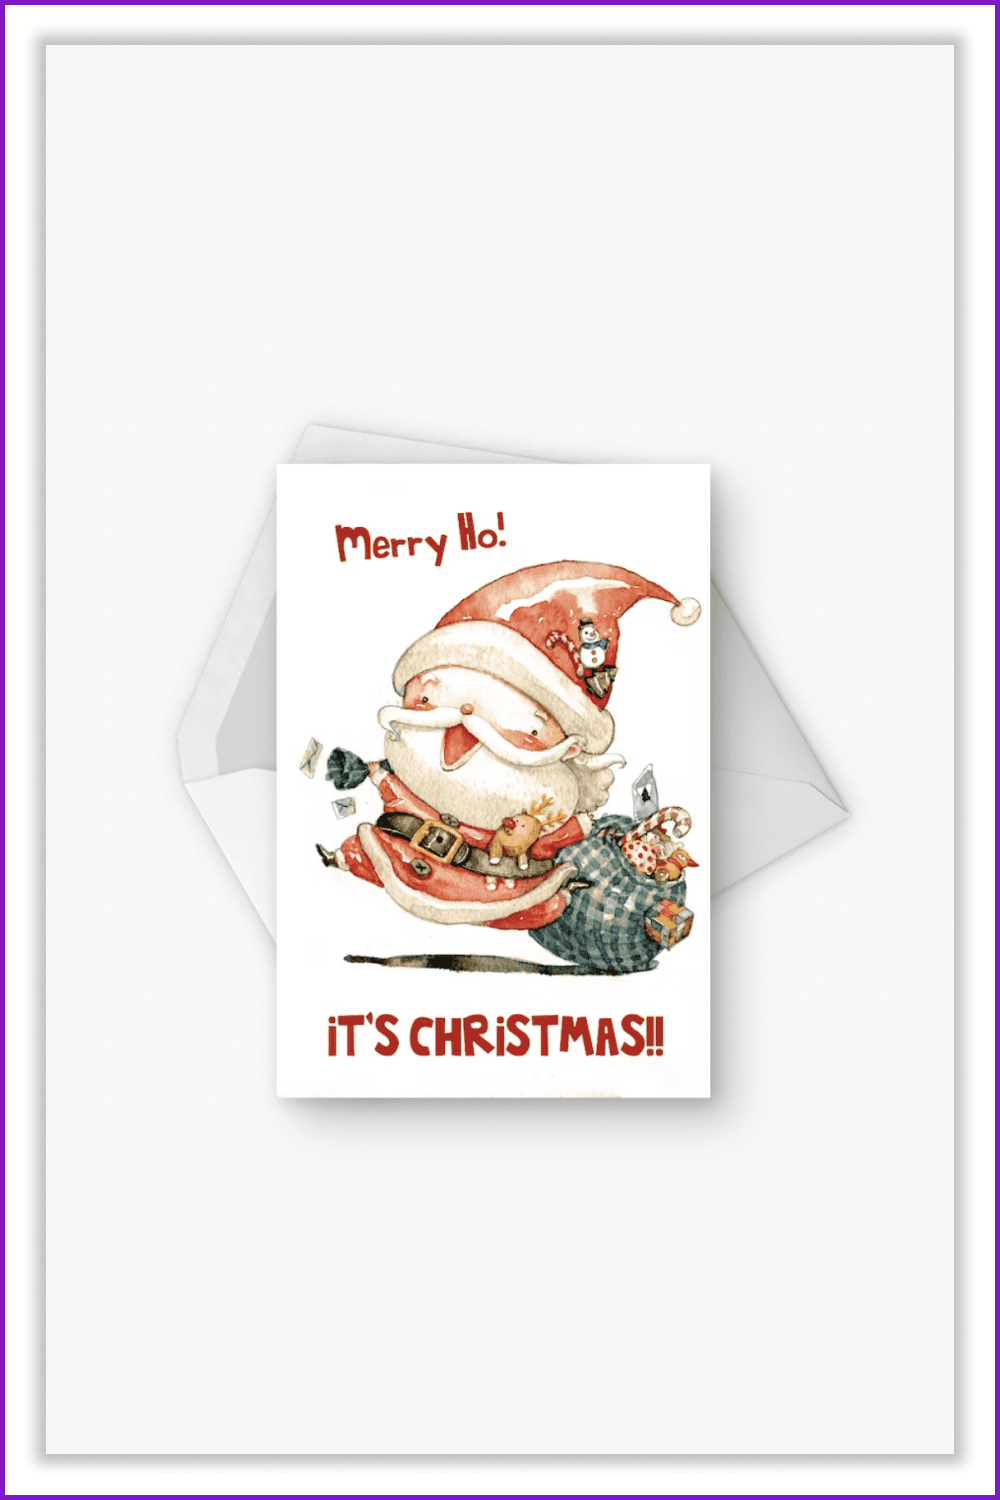 Greeting card with cute drawn Santa Claus and a bag of gifts.